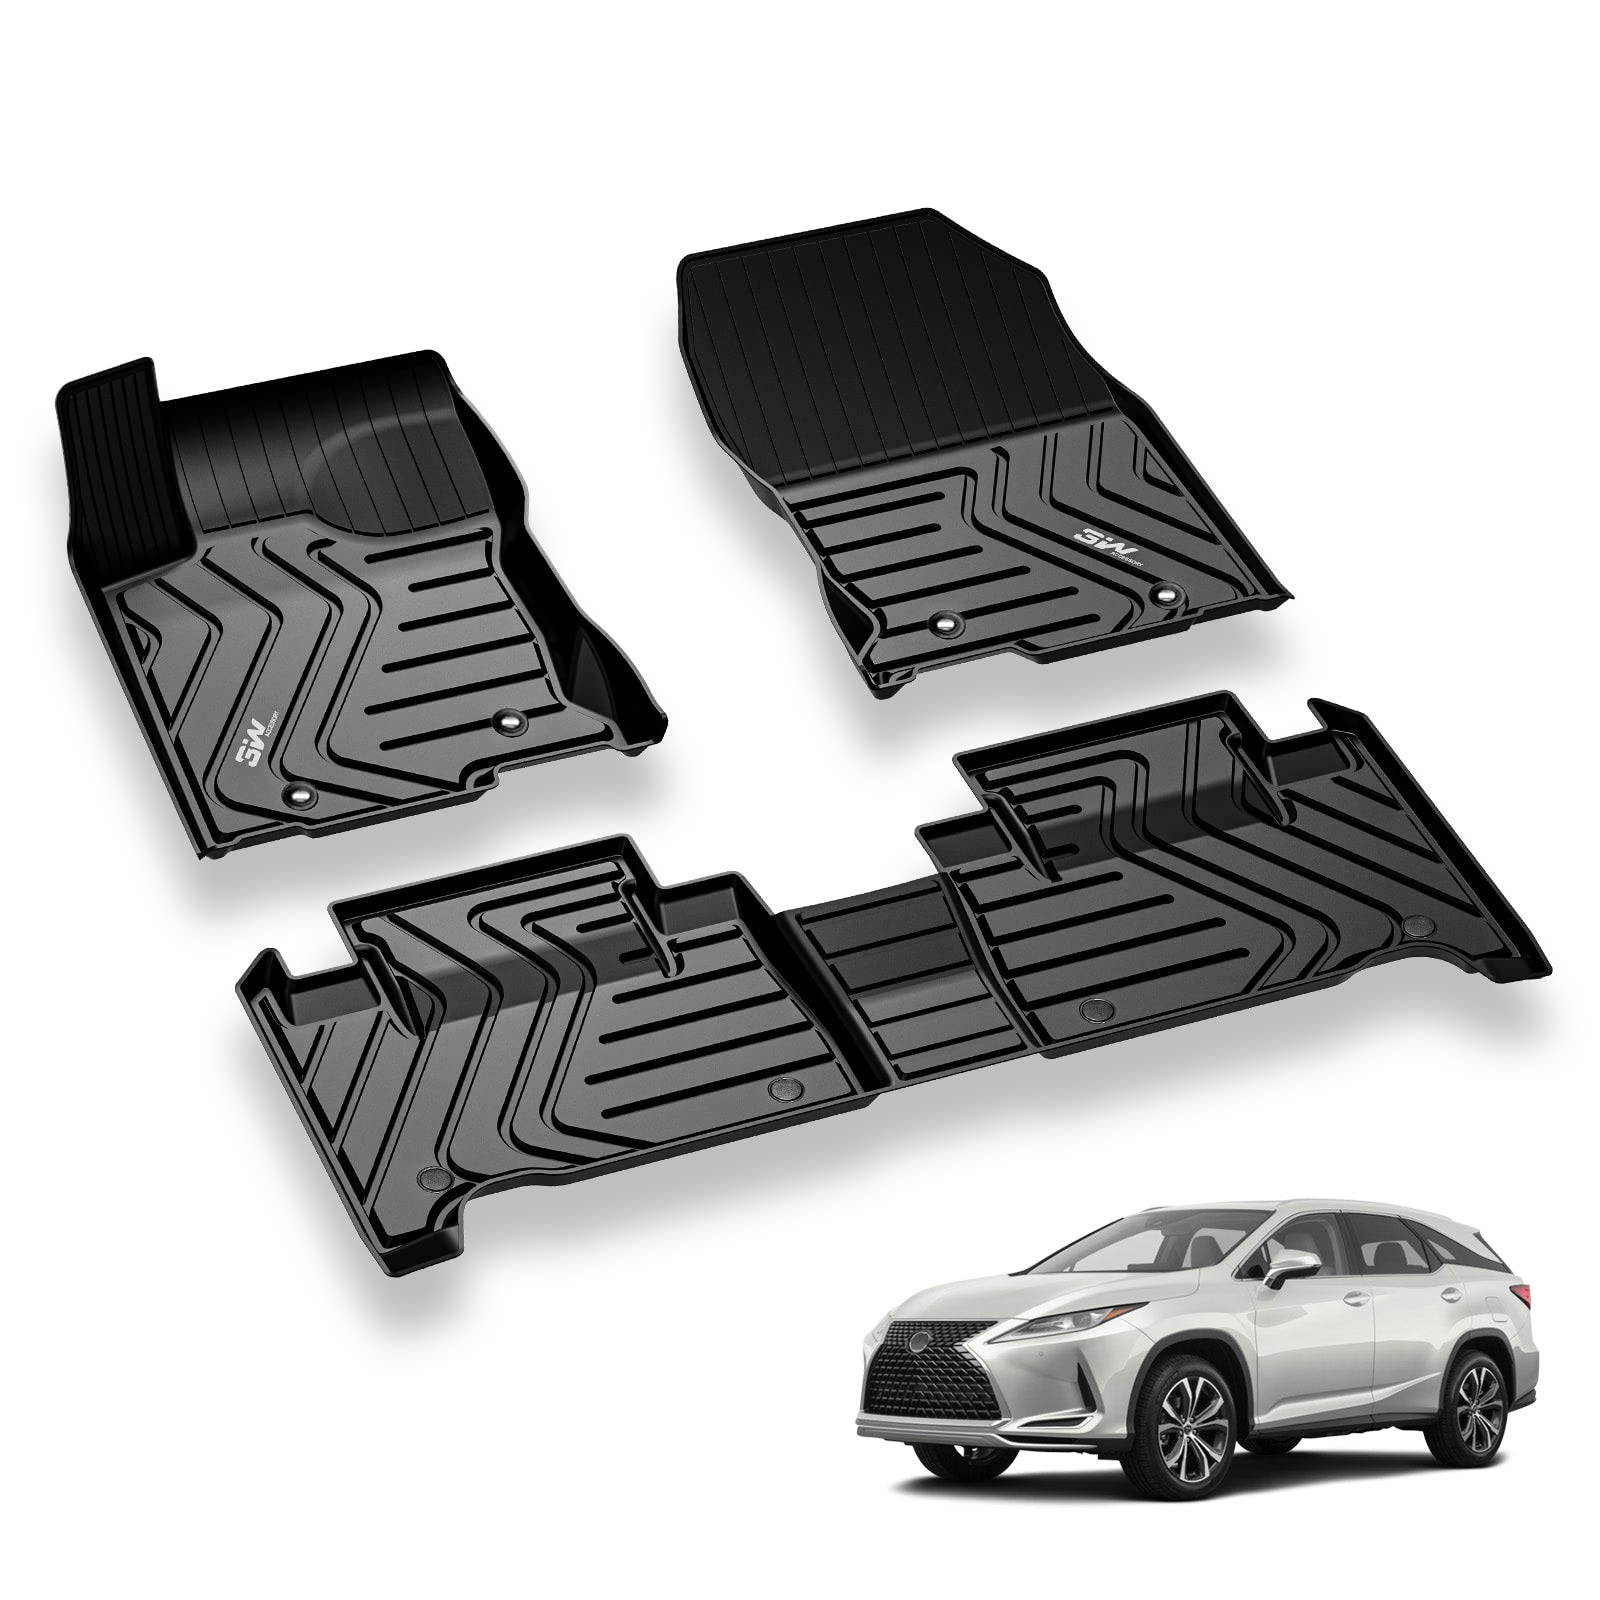 3W Lexus RX 2016-2022 (RX350/RX450h) / 2018-2022 RXL (RX350L/450hL) Custom Floor Mats TPE Material & All-Weather Protection Vehicles & Parts 3Wliners 2016-2022 RX 2016-2022 1st&2nd Row Mats